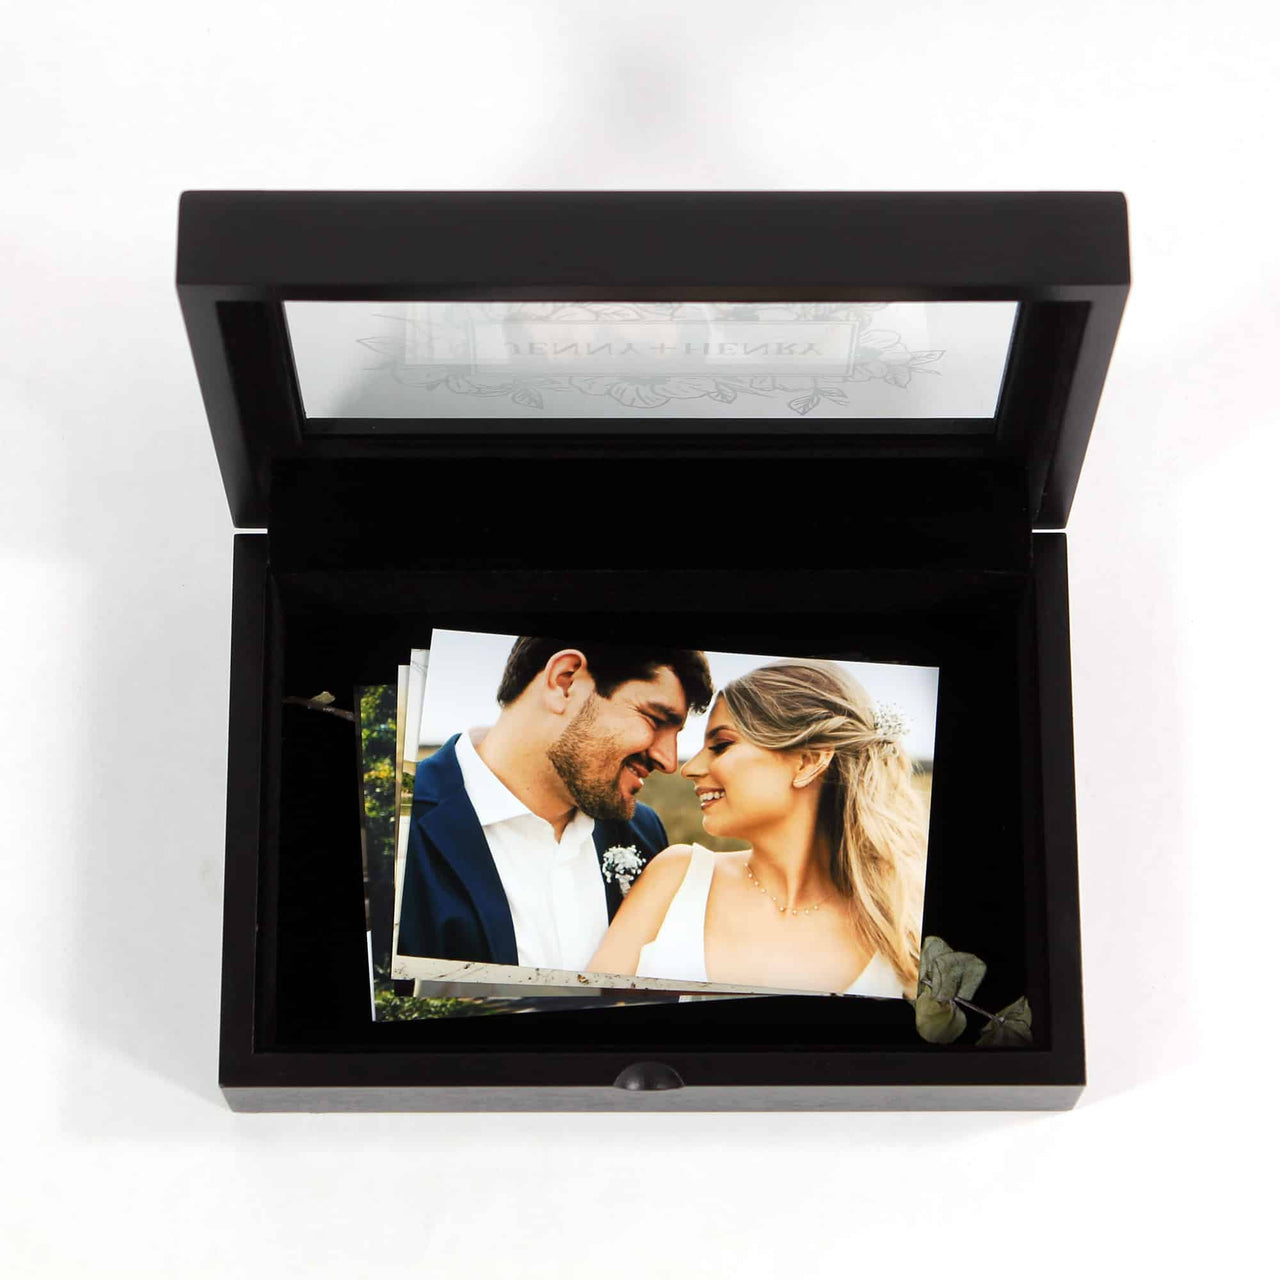 wedding keepsake storage box made from black wood with a velvet inner lining, holds photographs, memories, flowers, table settings, wedding momentos